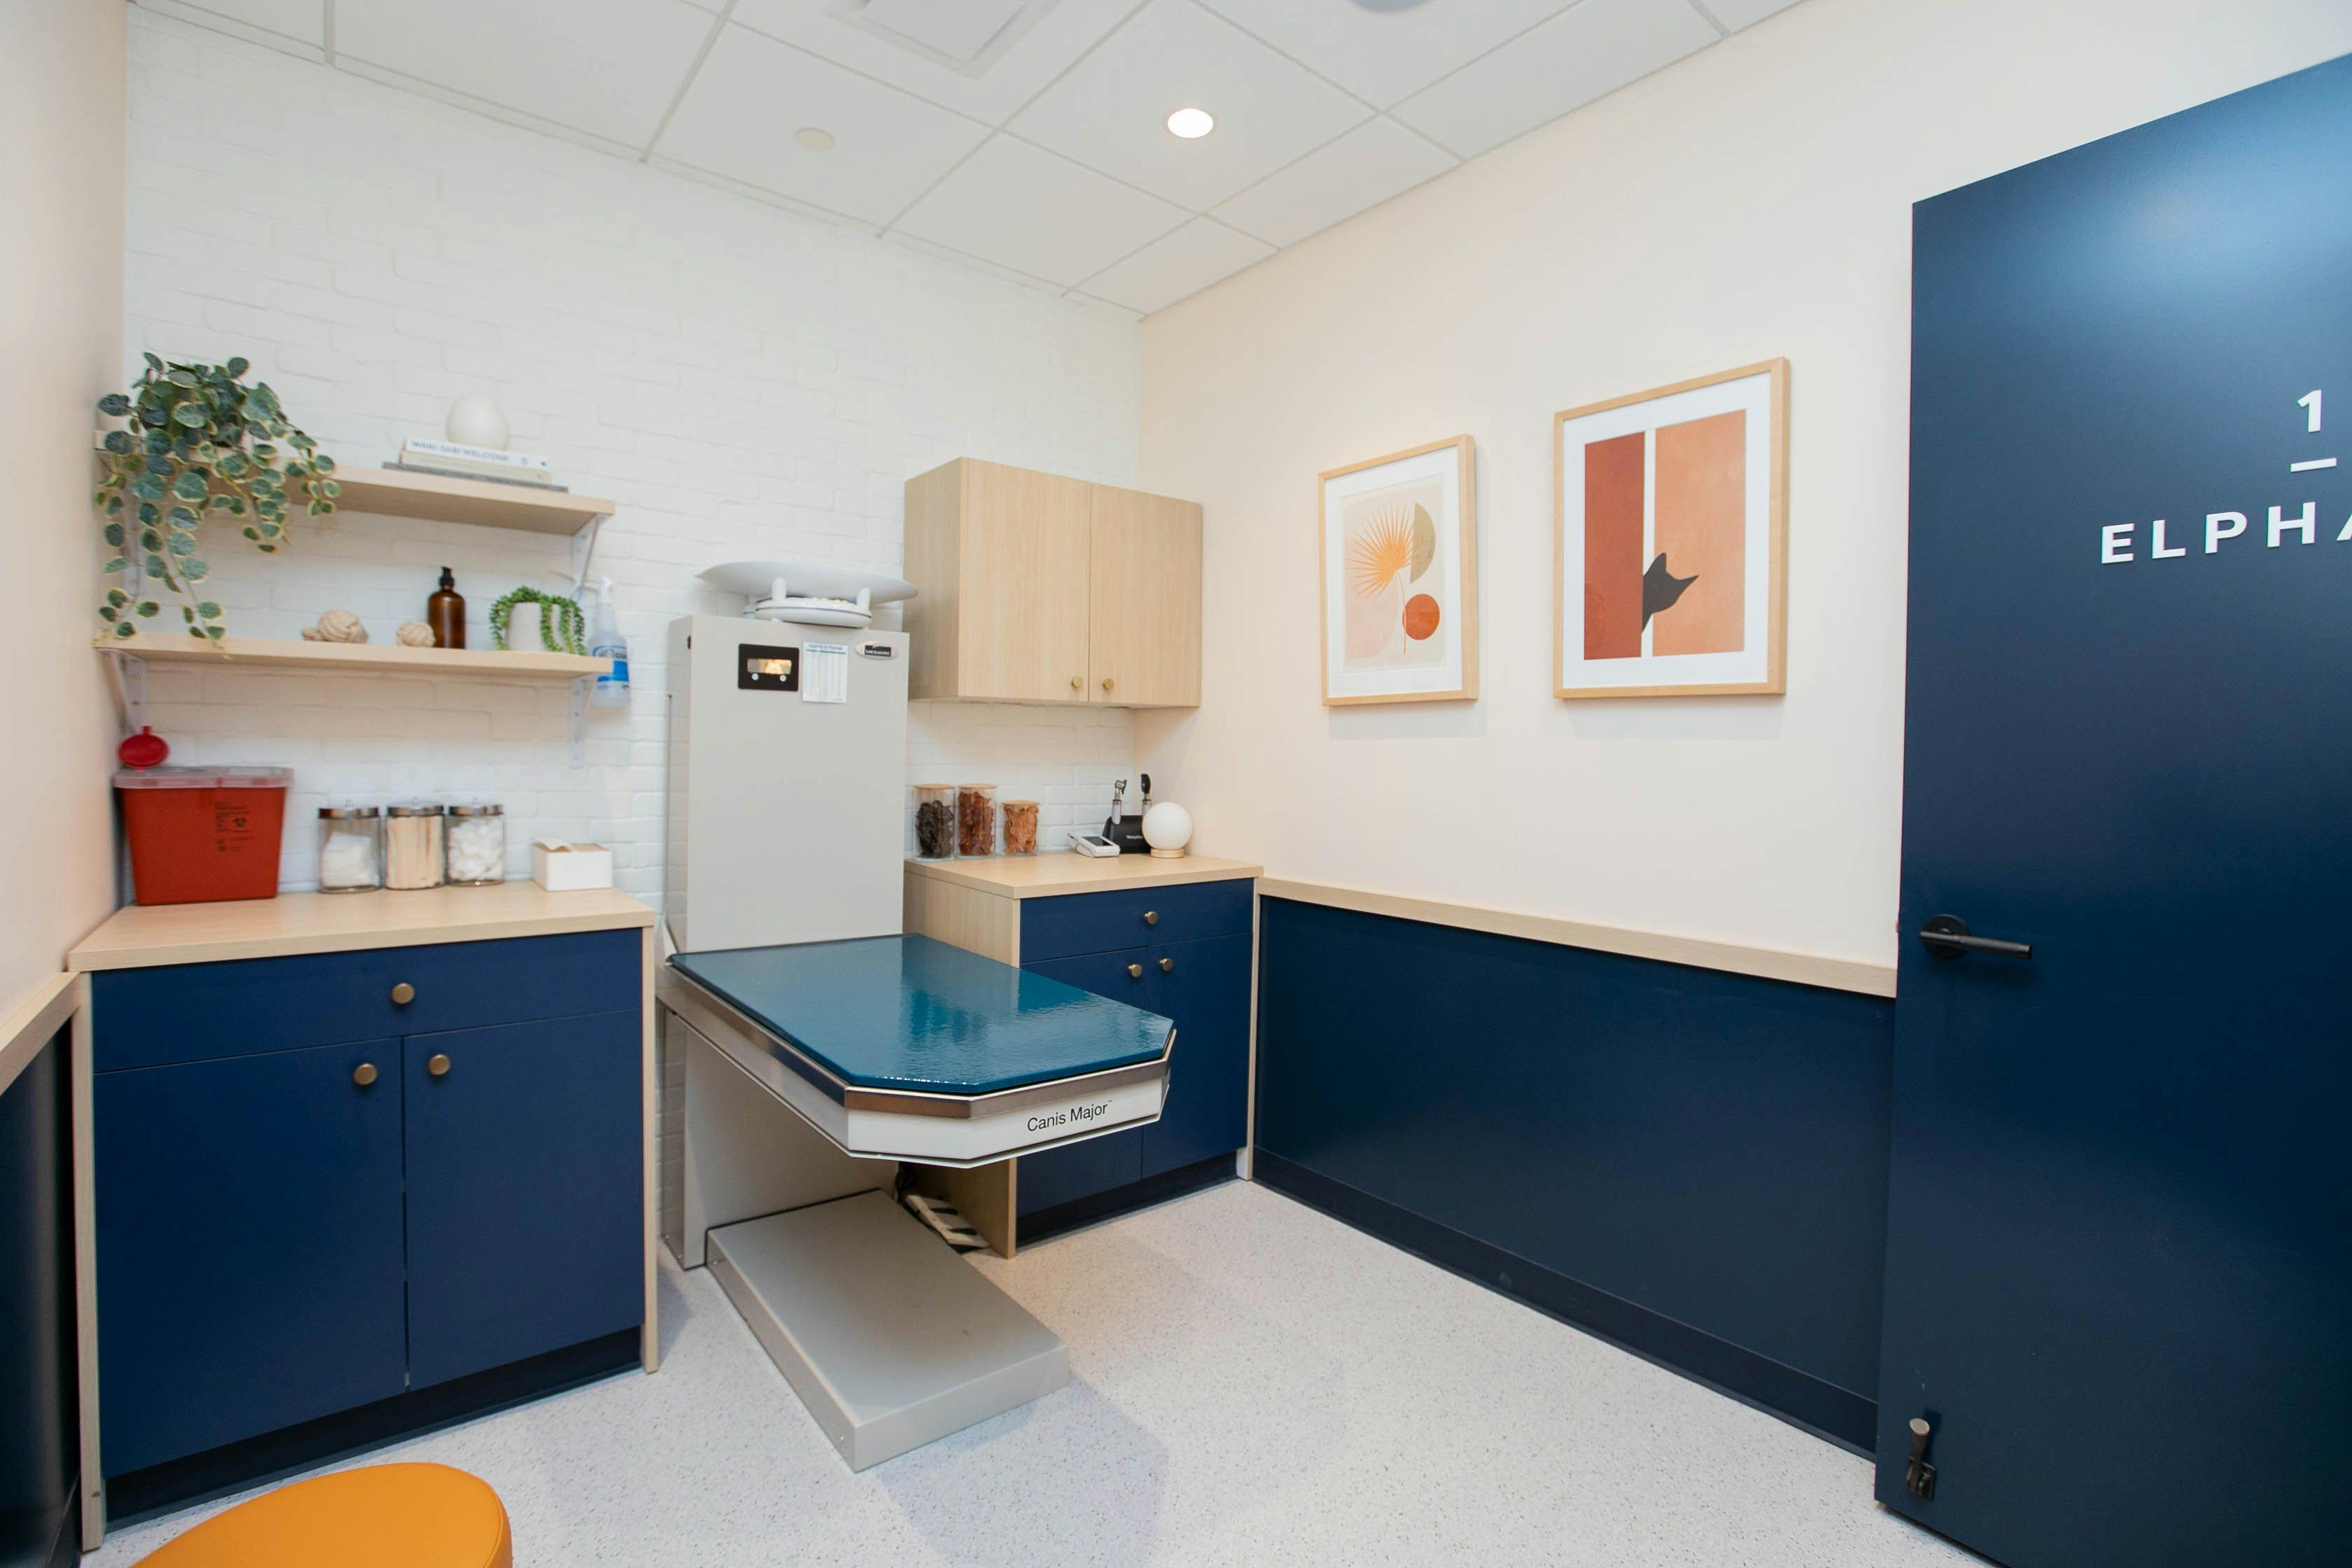 The color scheme and clean design elements extend into the exam rooms. White brick walls, open shelving, and deep blue cabinets give these rooms functional style.